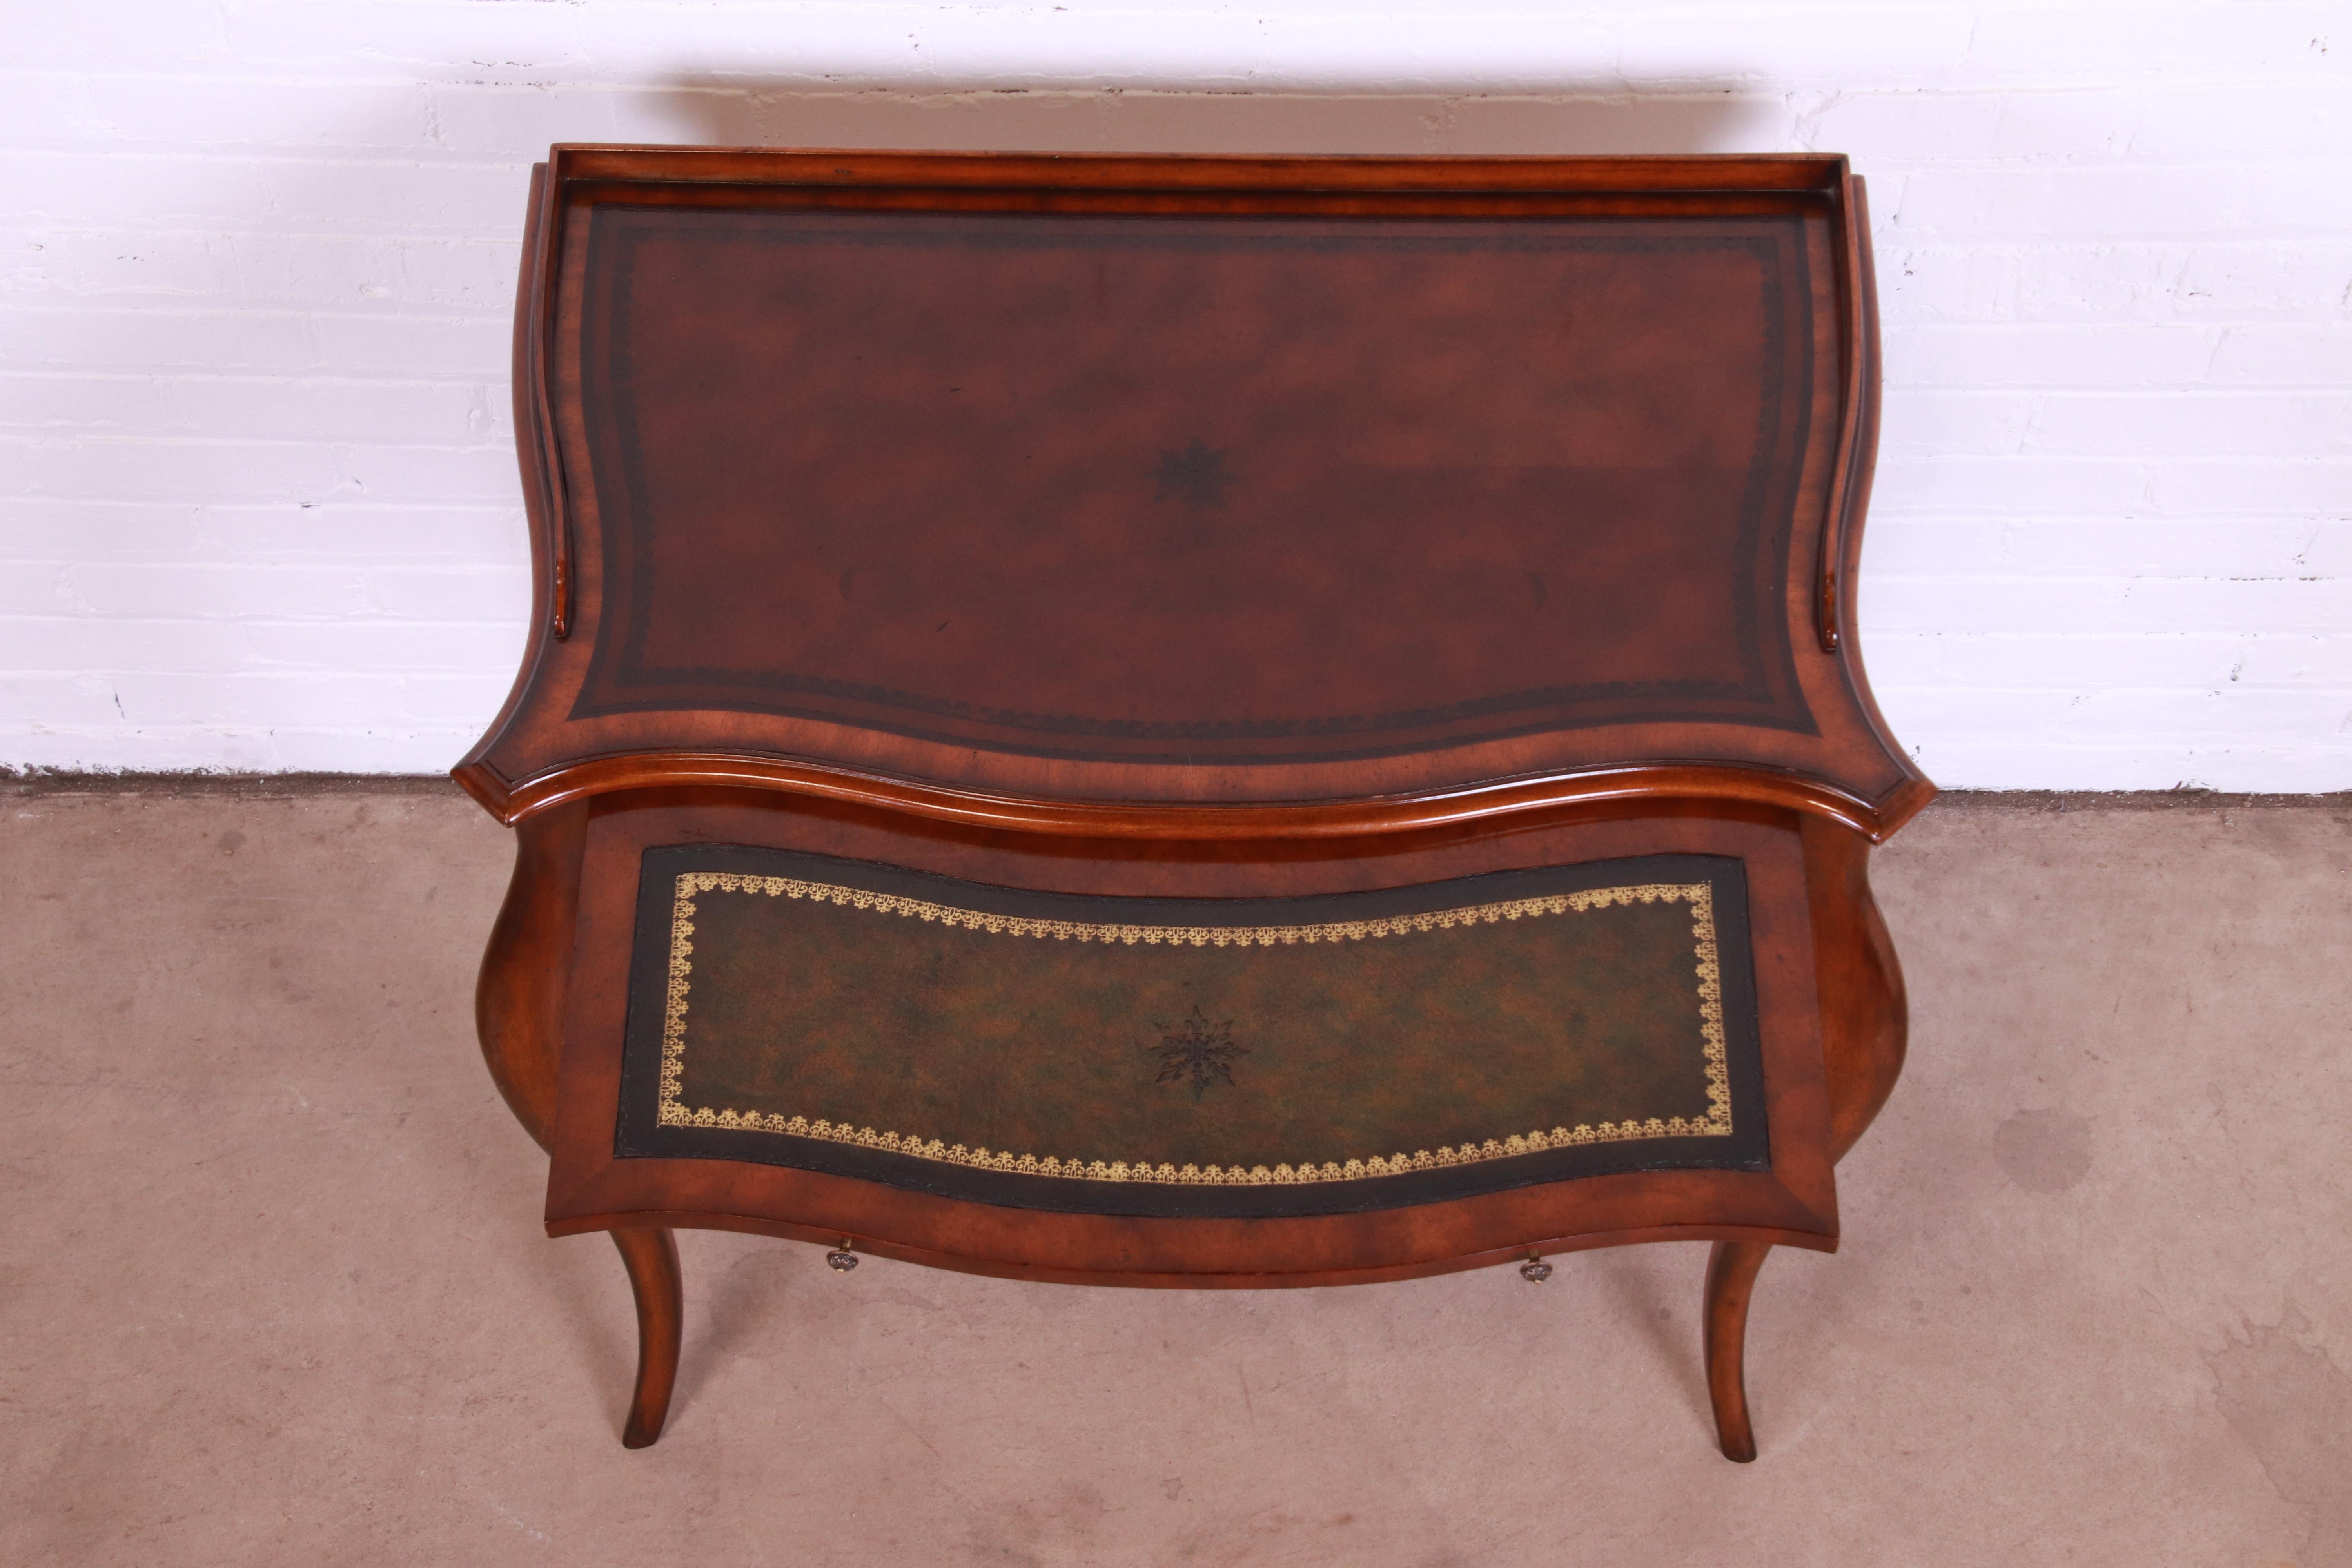 Maitland Smith French Provincial Louis XV Mahogany Leather Top Writing Desk For Sale 3